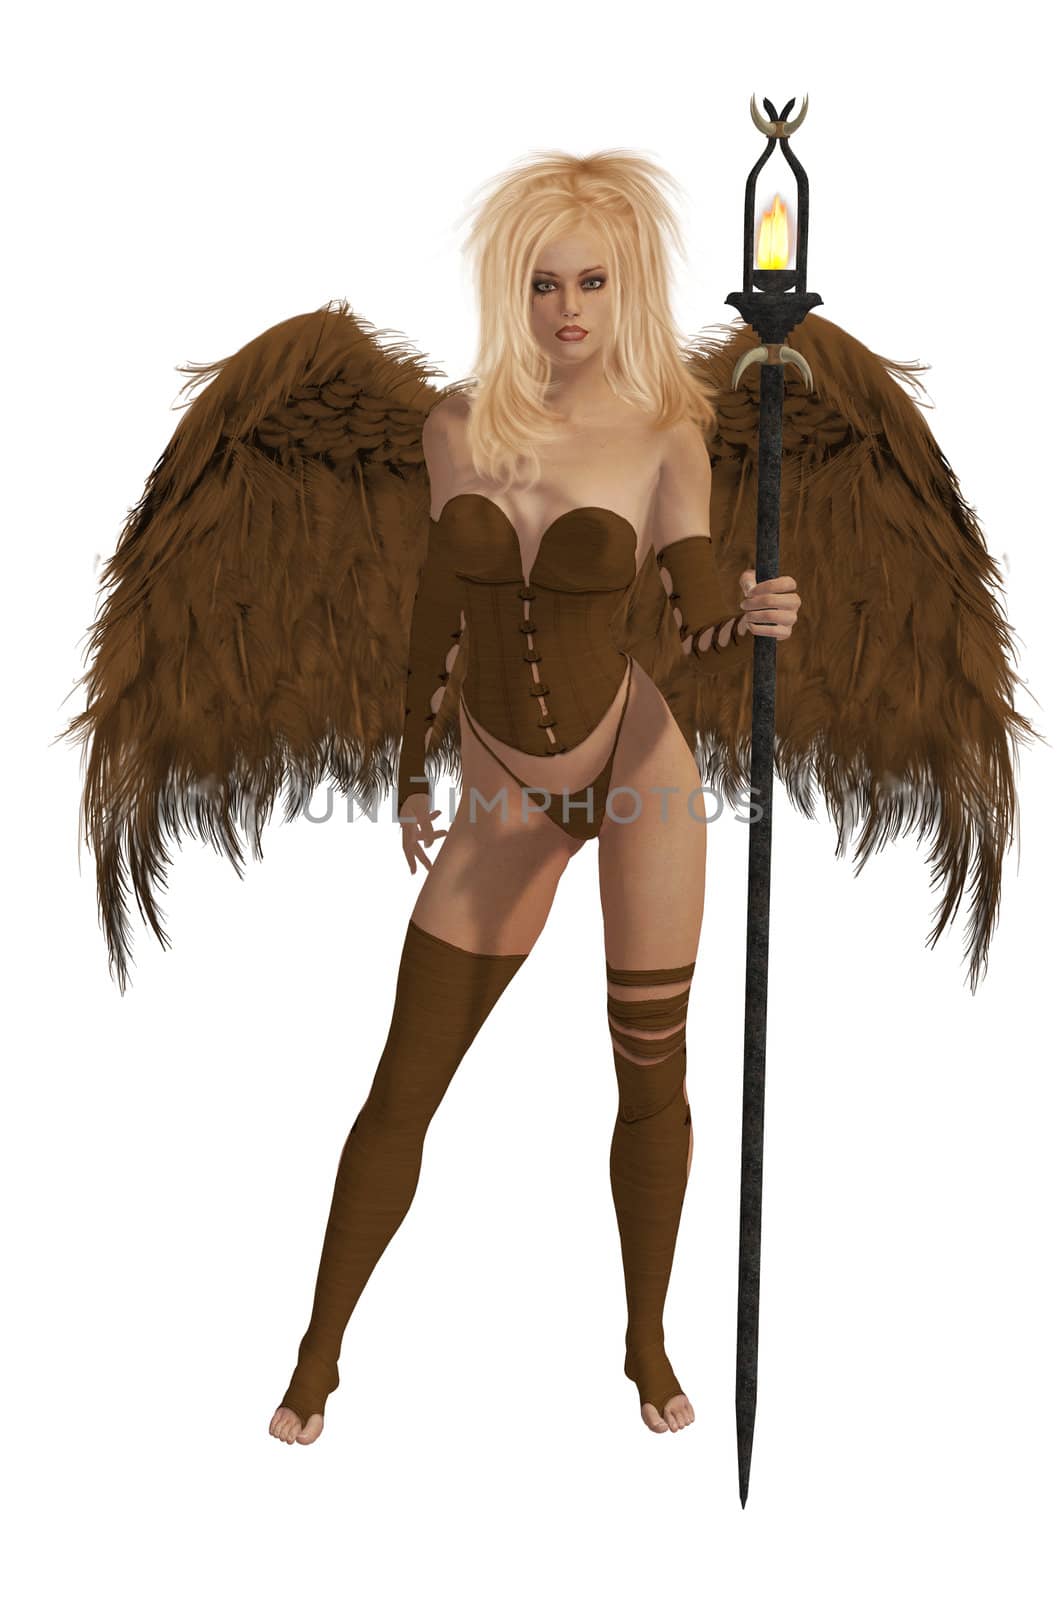 Brown Winged Angel With Blonde Hair by kathygold